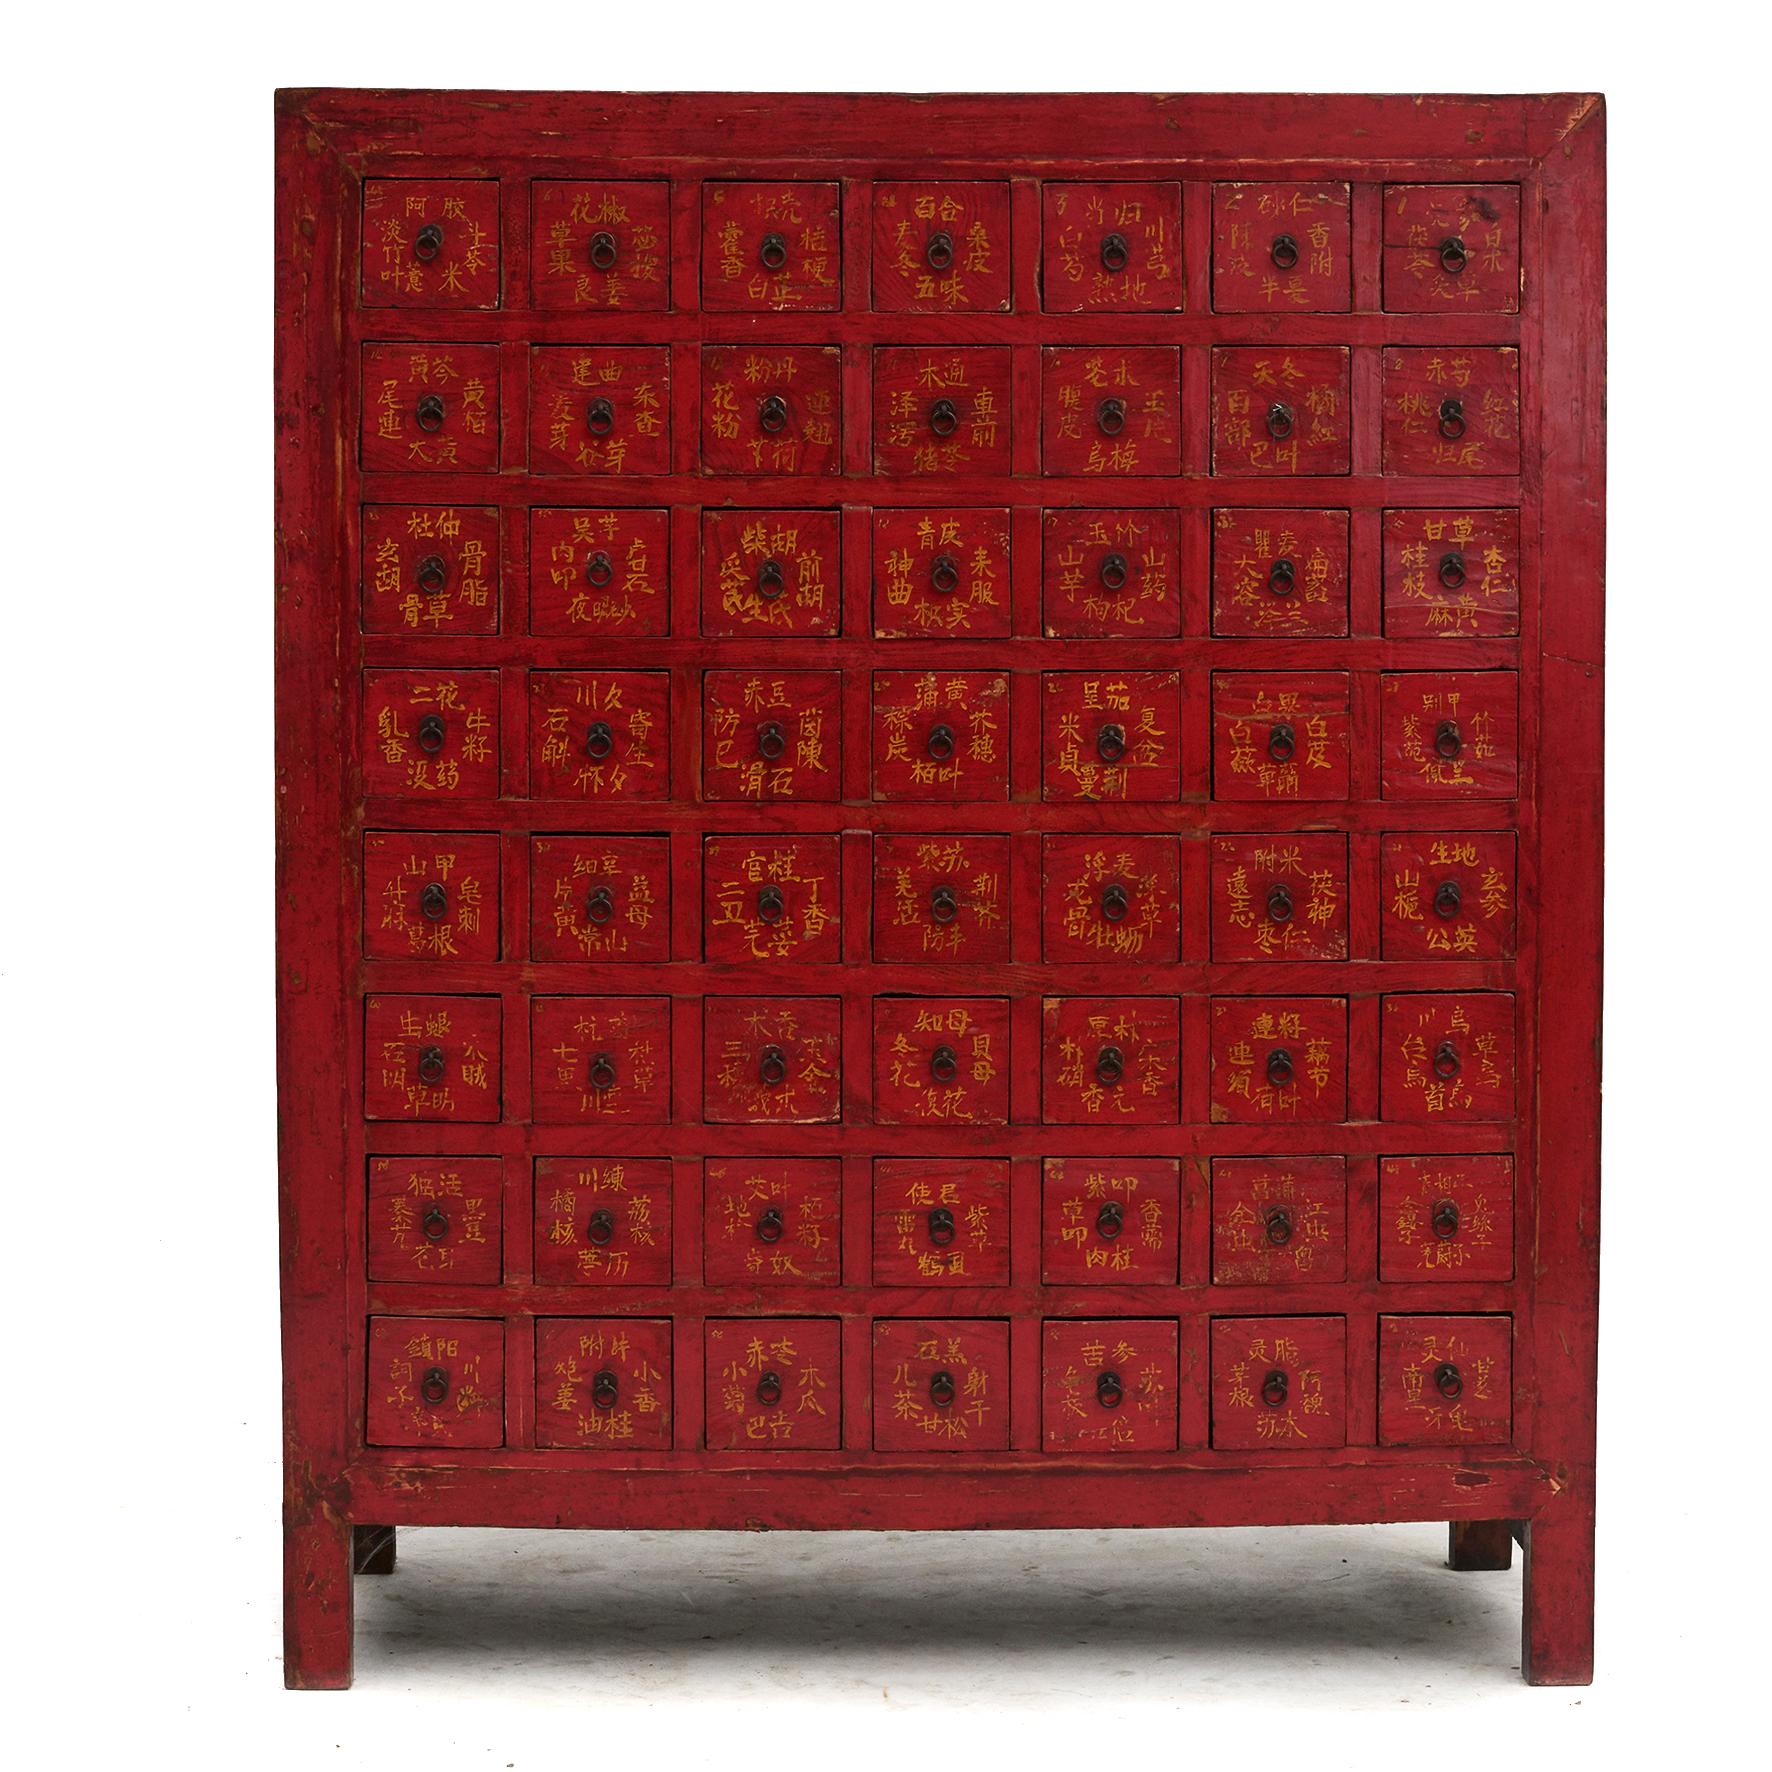 A Chinese Qing Dynasty apothecary / pharmacy medicine chest in original red lacquer.
56 drawers with hand written Chinese calligraphy in yellow lacquer. 
These were used to store and organise Chinese herbs and the drawers were labeled according to